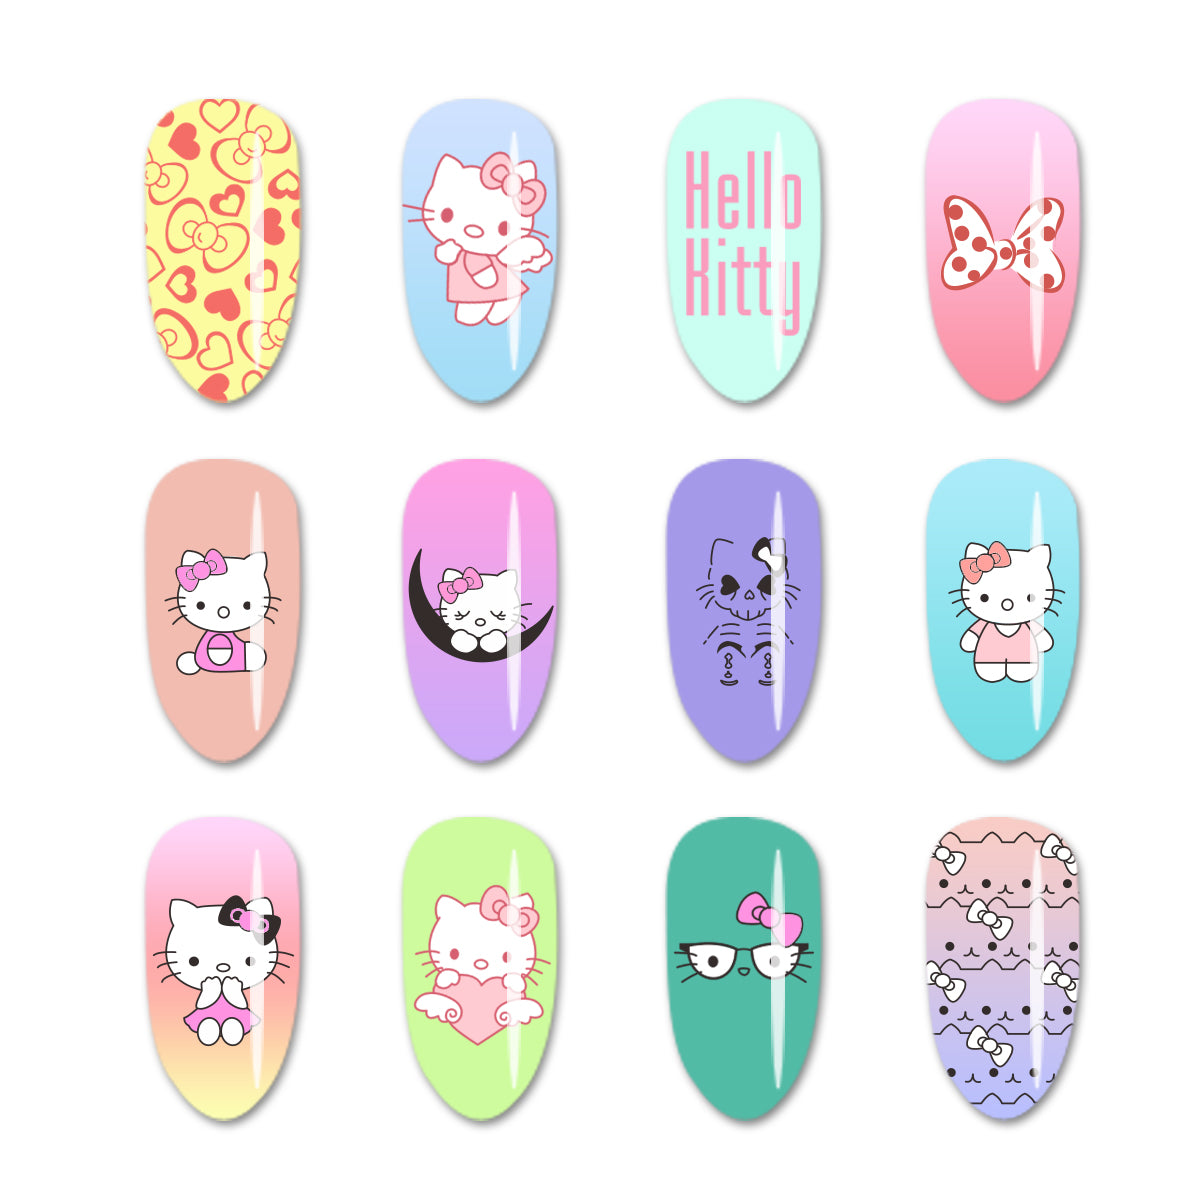 BeautyBigBang Cute Cats Nail Art Stamping Plates Stainless Steel